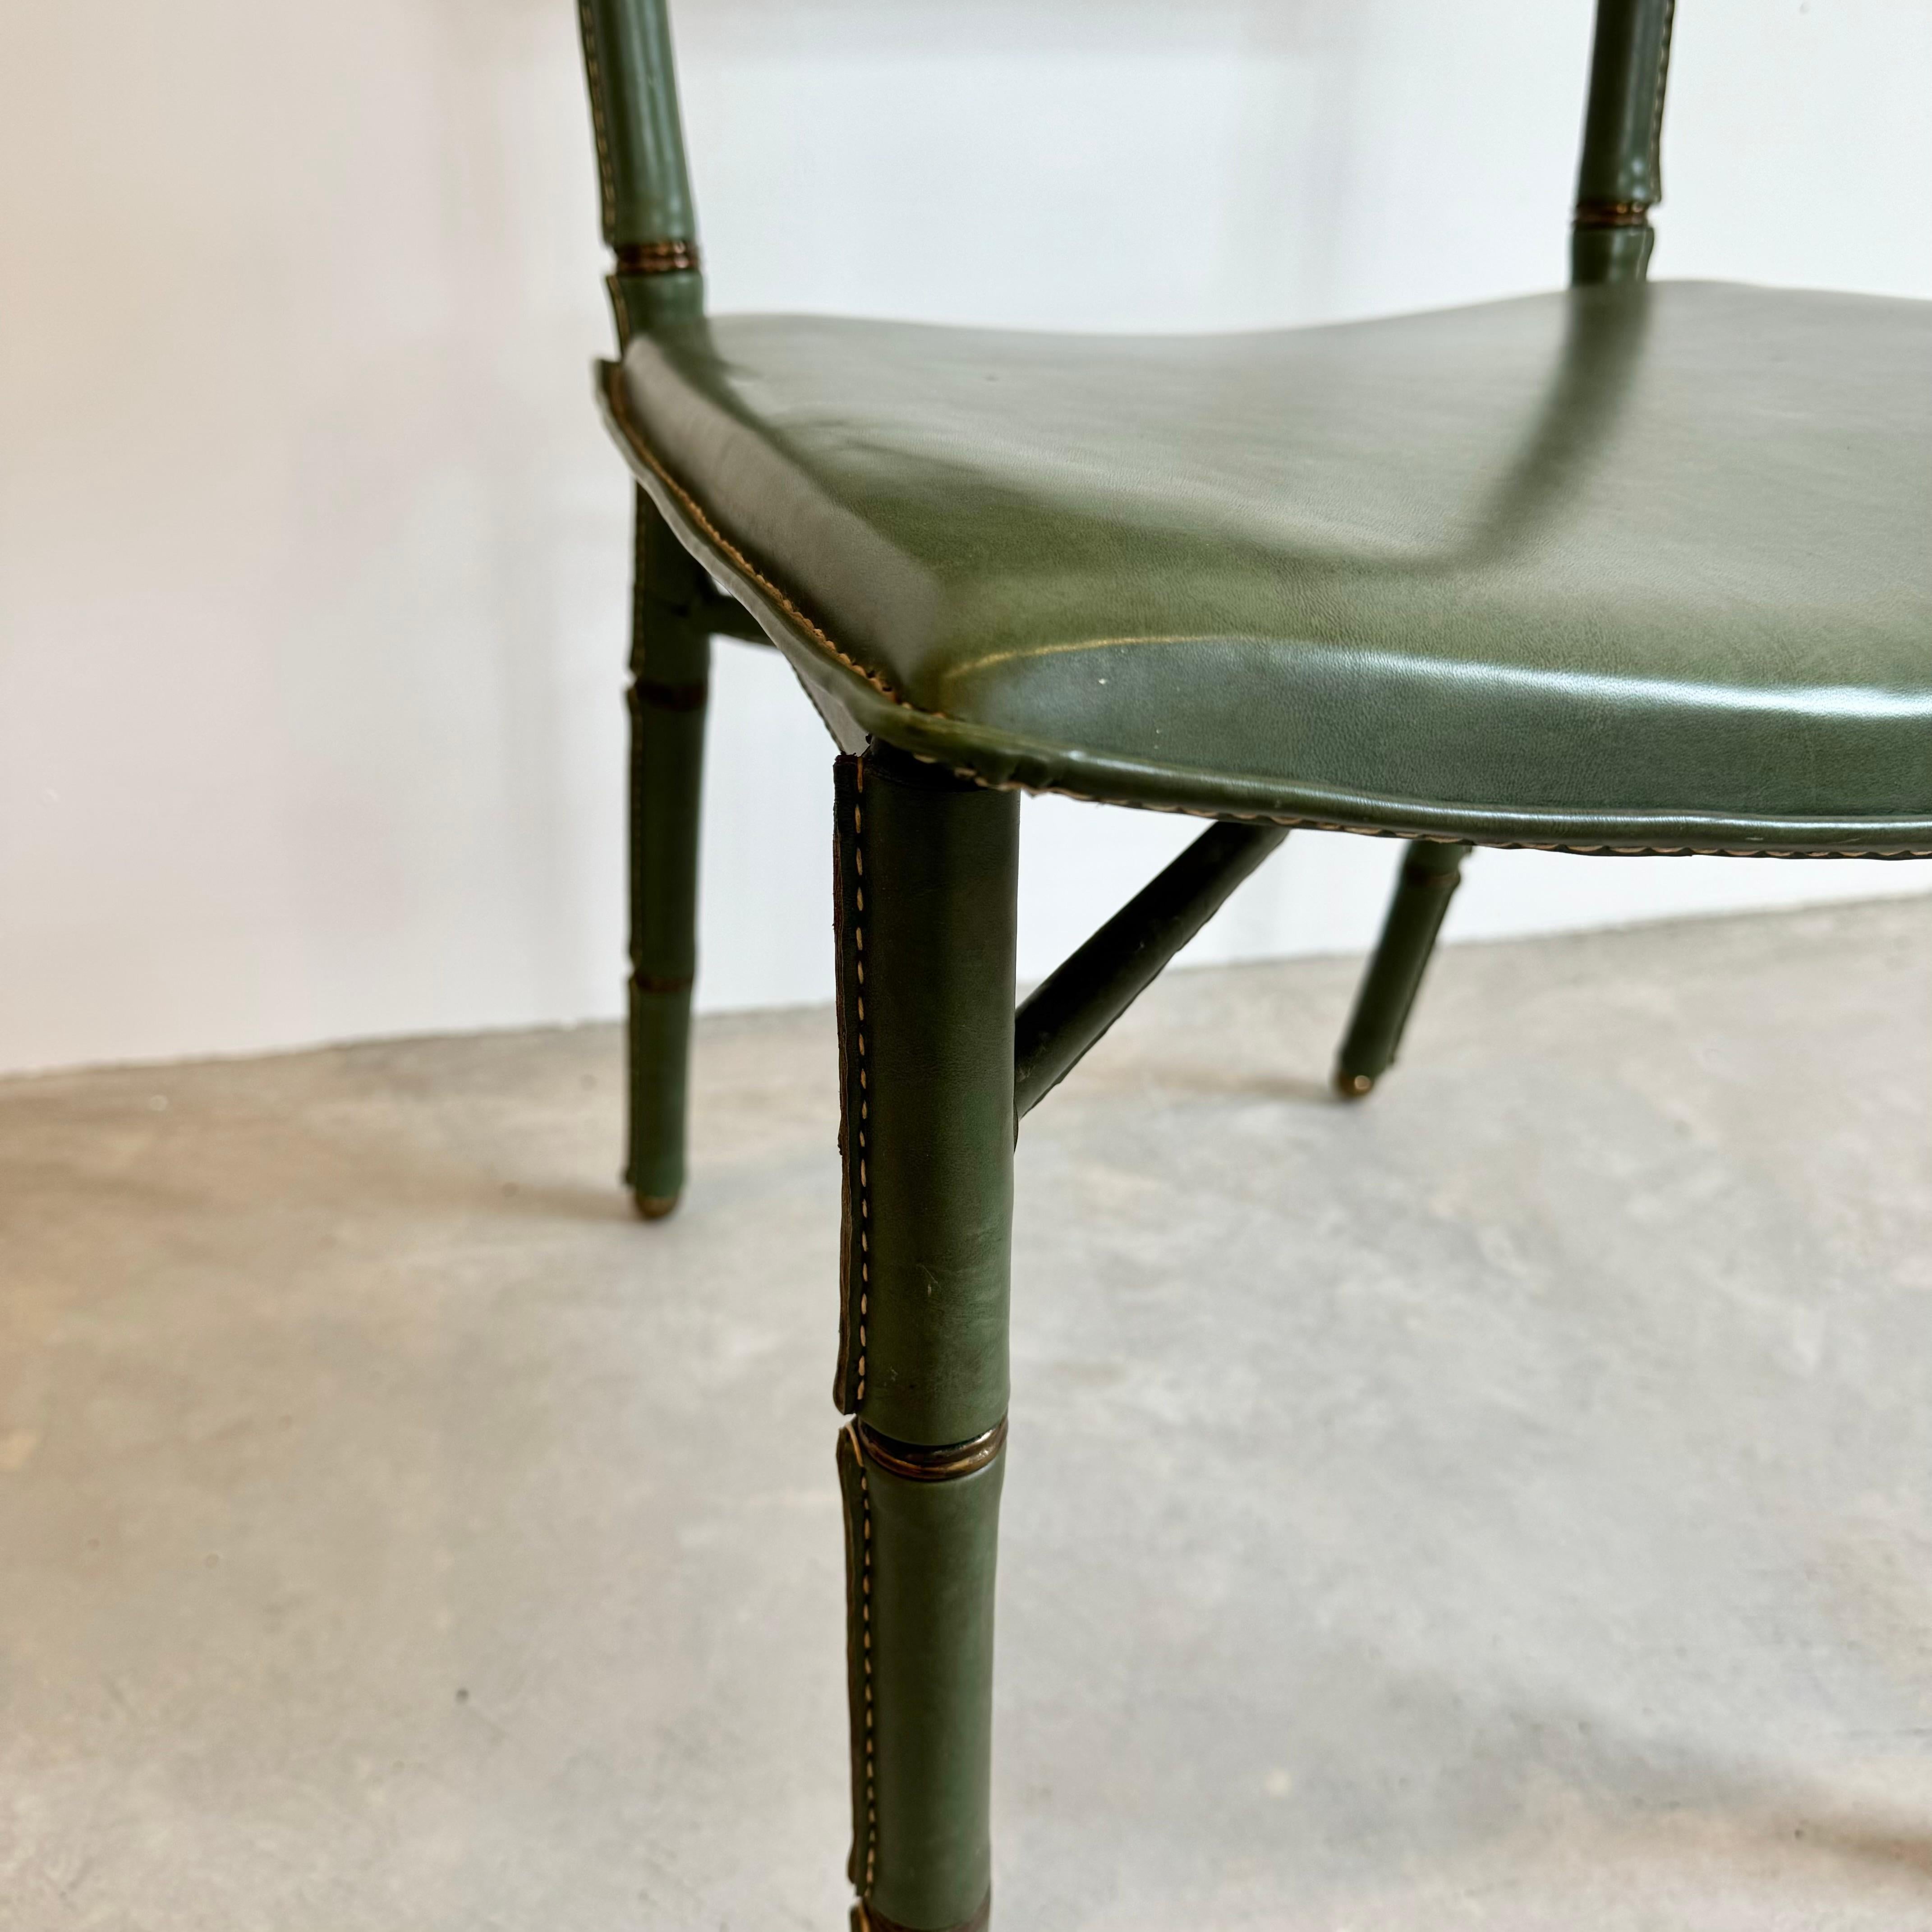 Jacques Adnet Green Leather Chairs, Circa 1950s, France For Sale 10